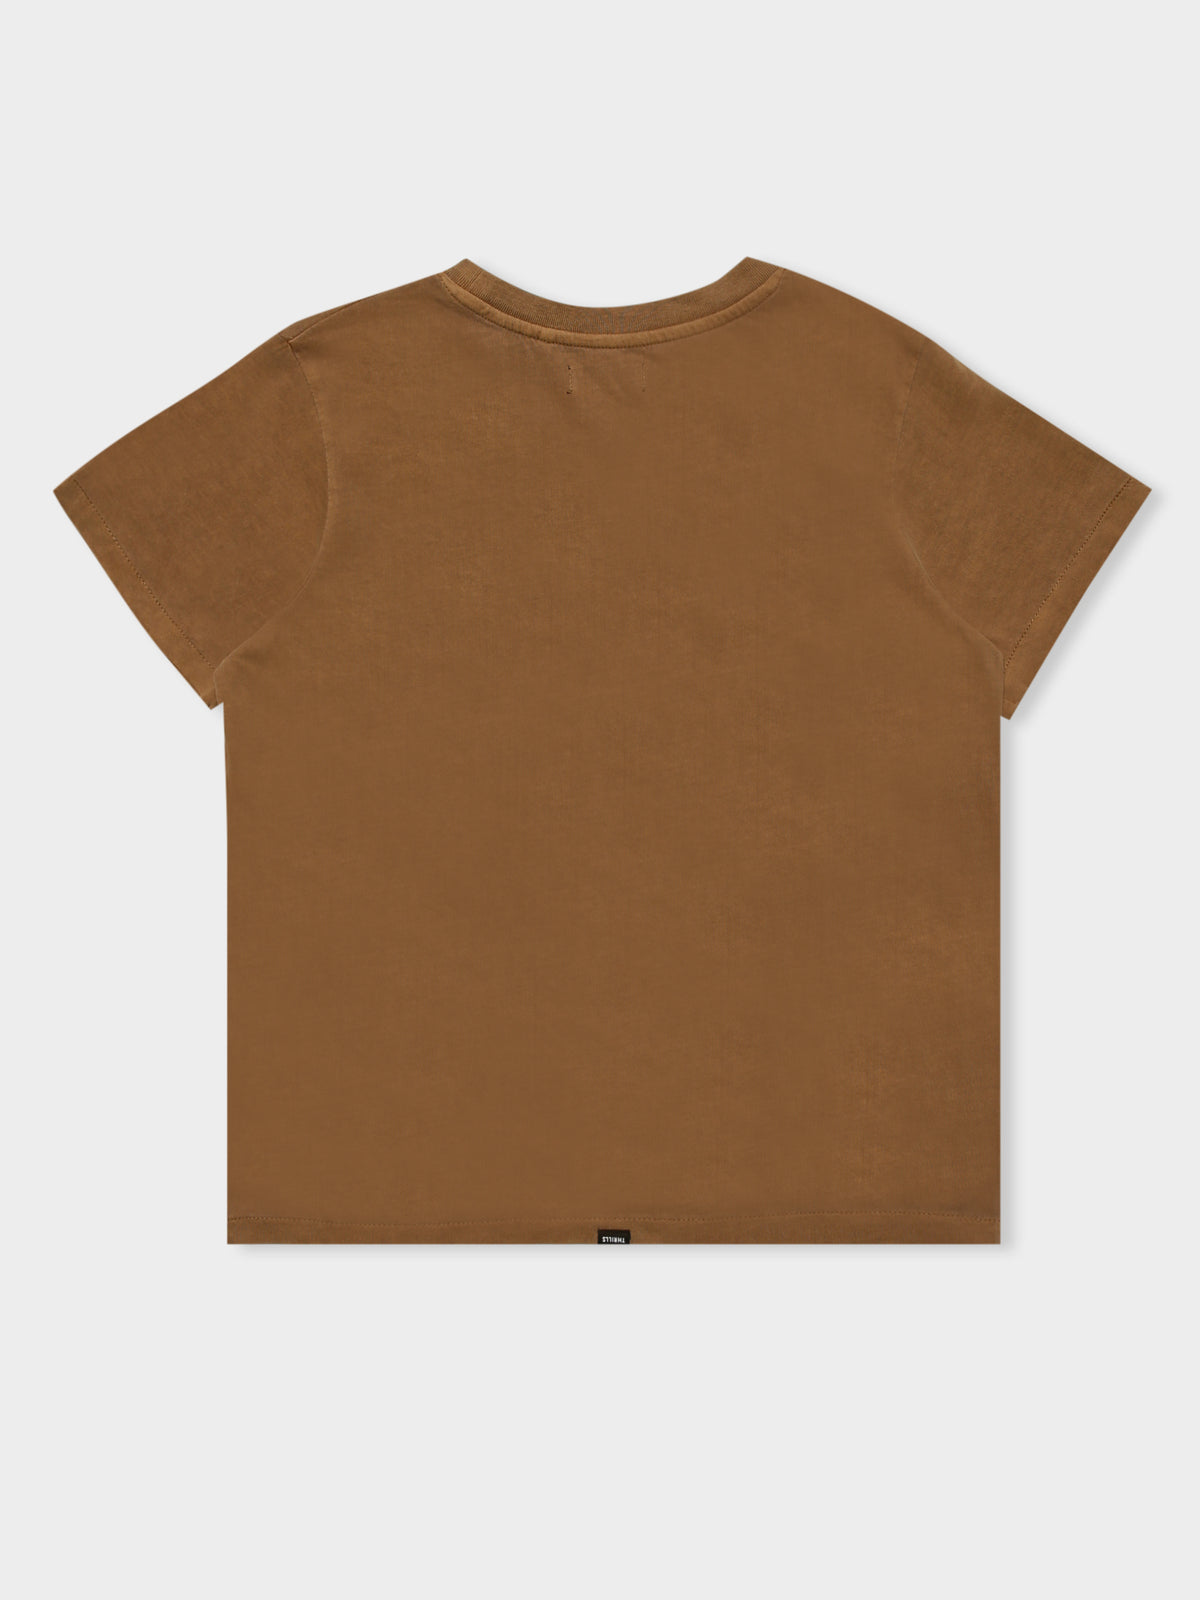 Unlimited Relaxed T-Shirt in Tobacco Brown